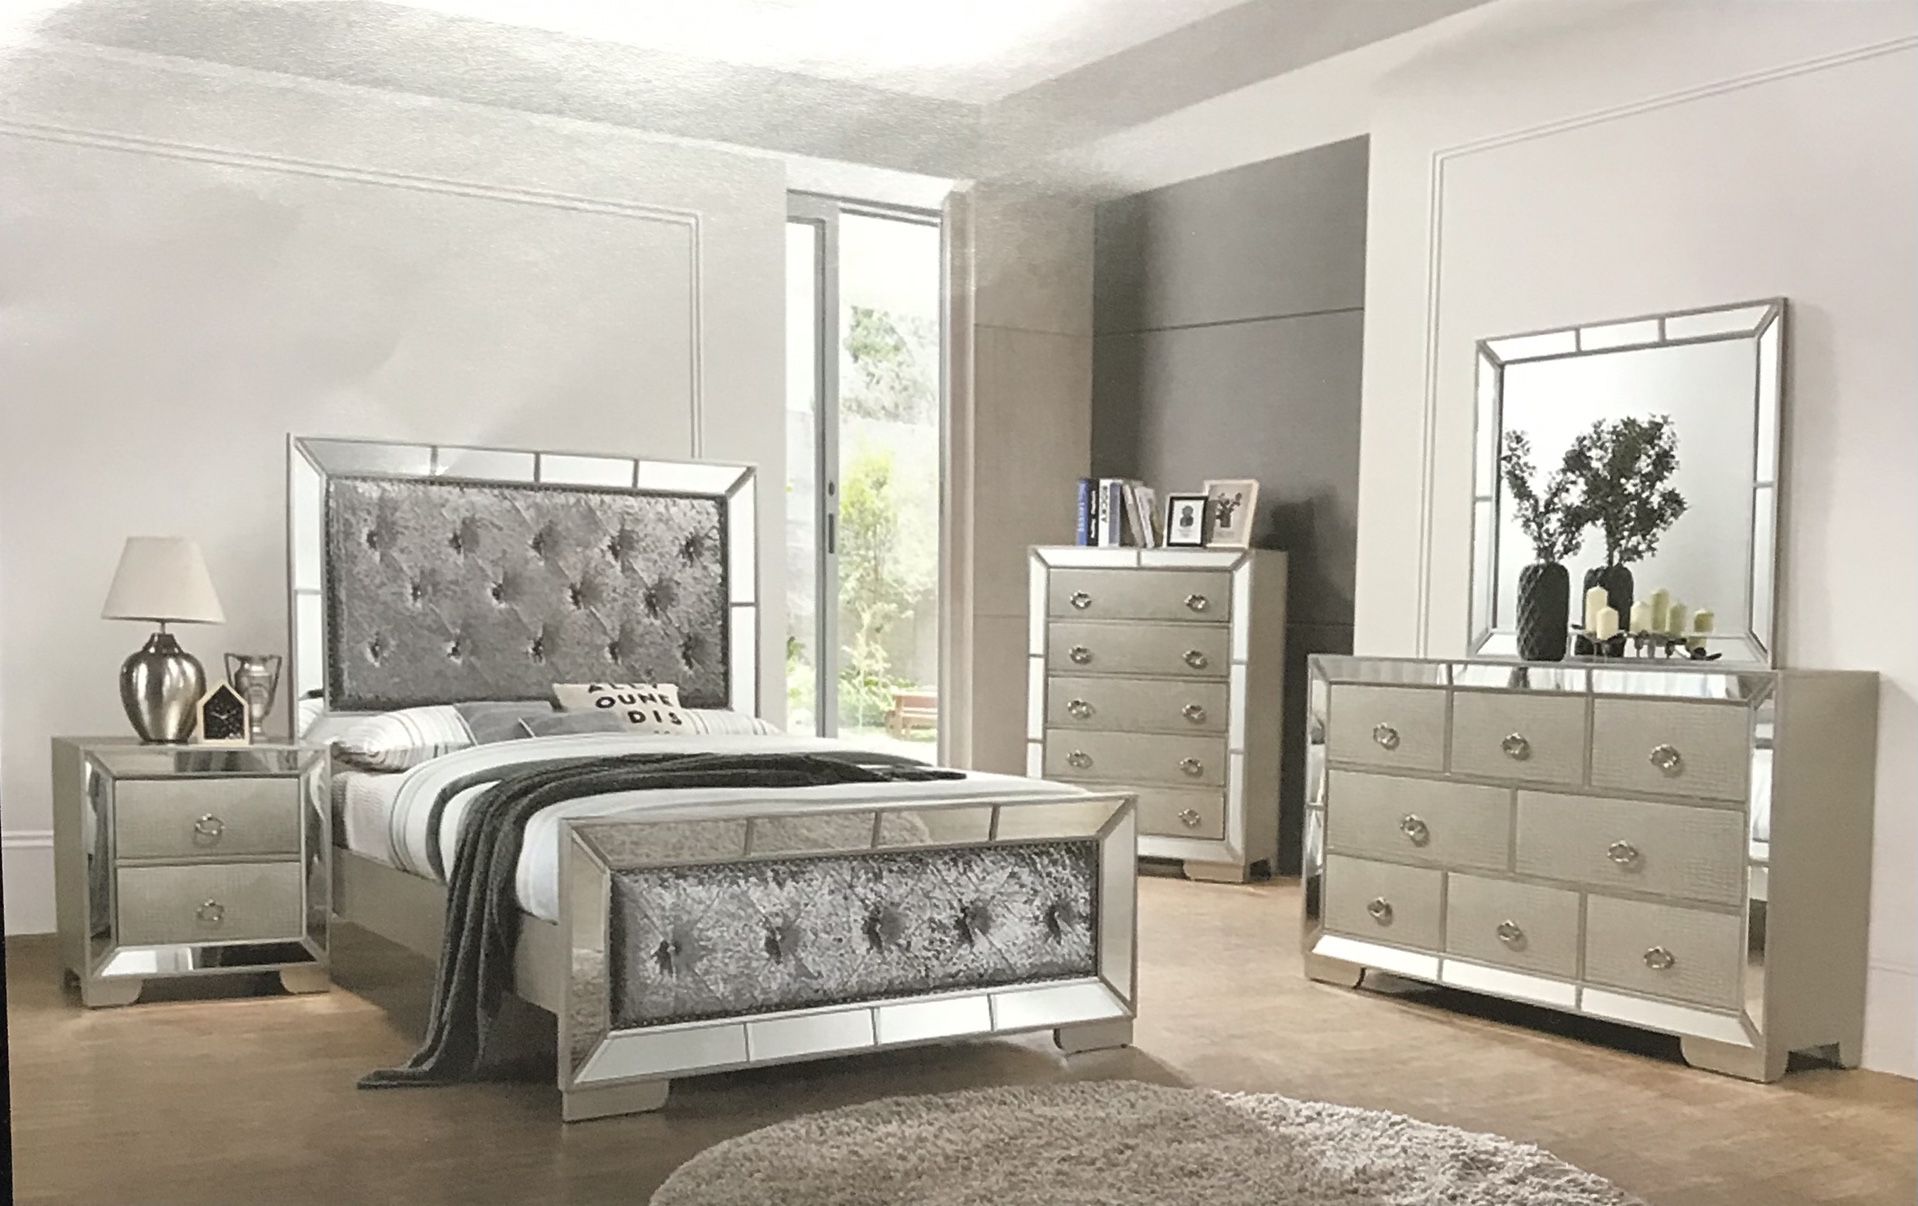 Brand New Queen Size Bedroom Set$1599.financing Available No Credit Needed 